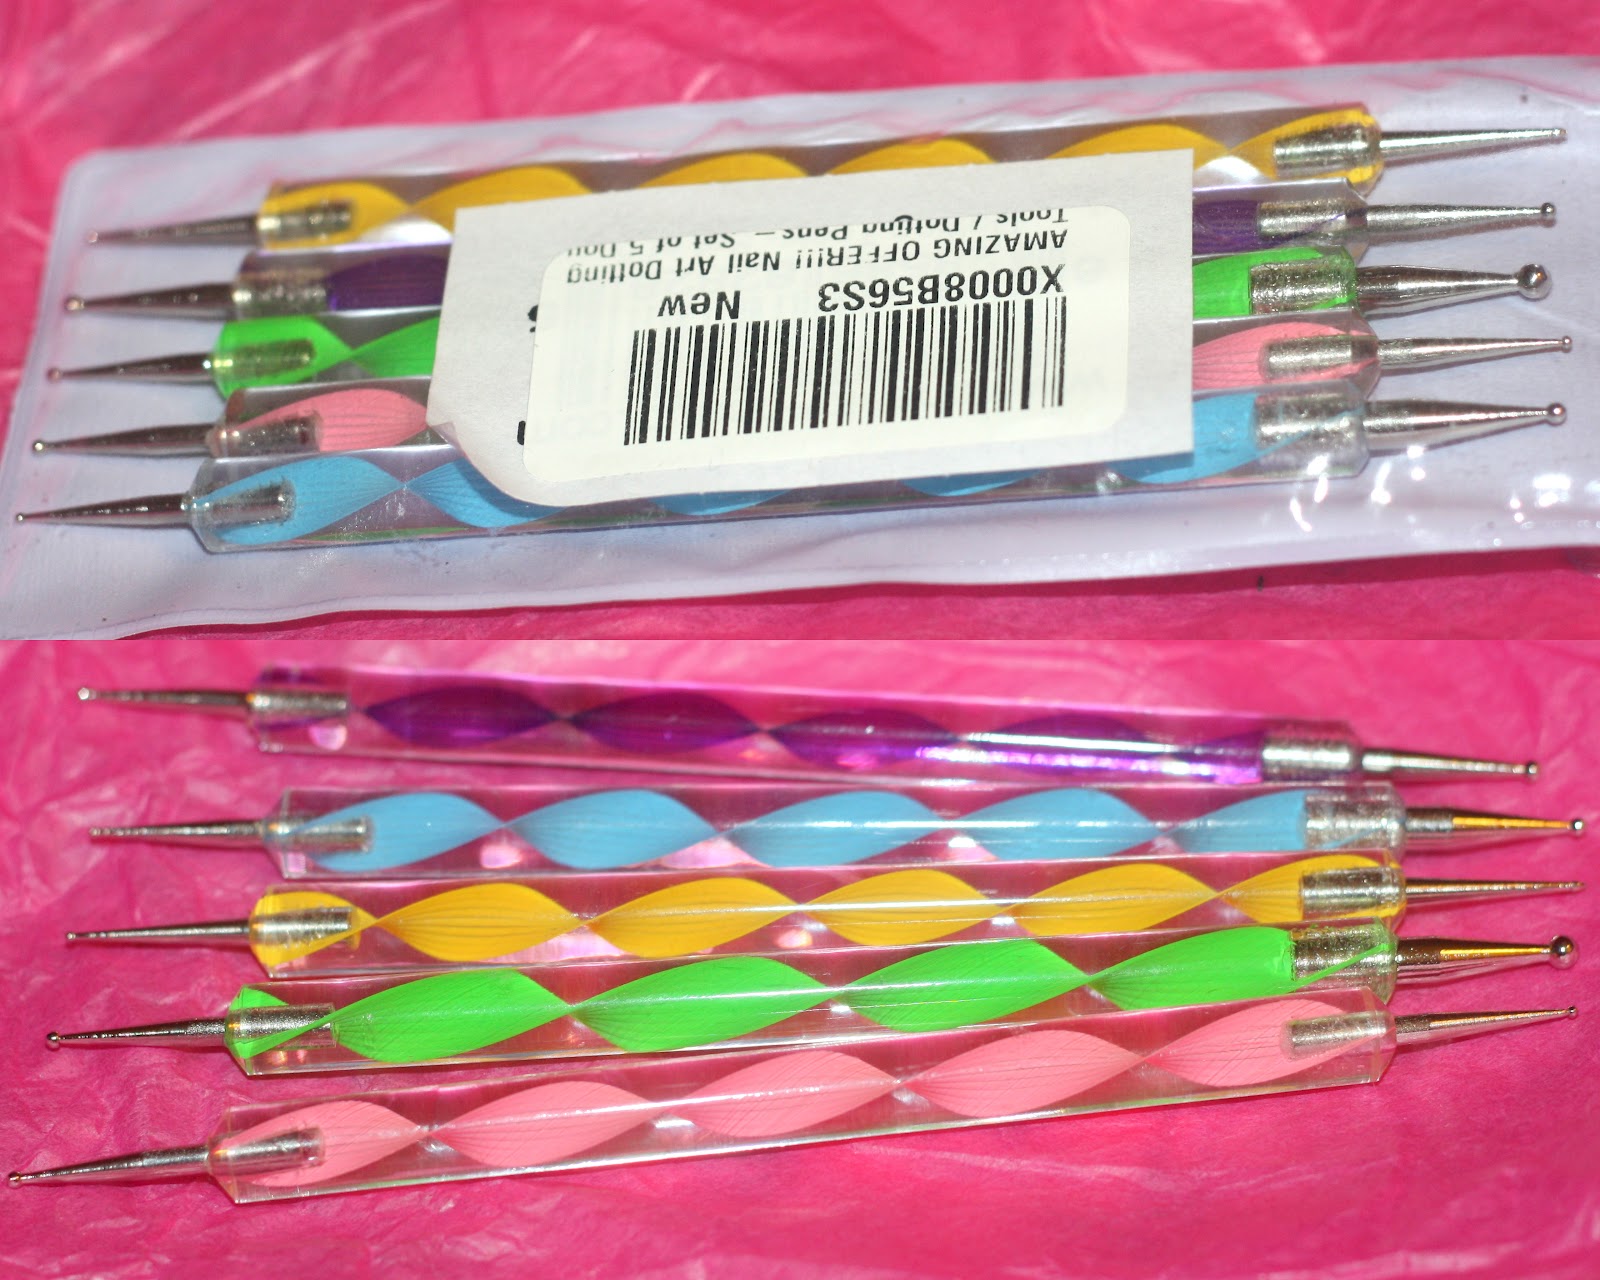 Today, I'll be reviewing these Cheeky Nail Art Dotting tools